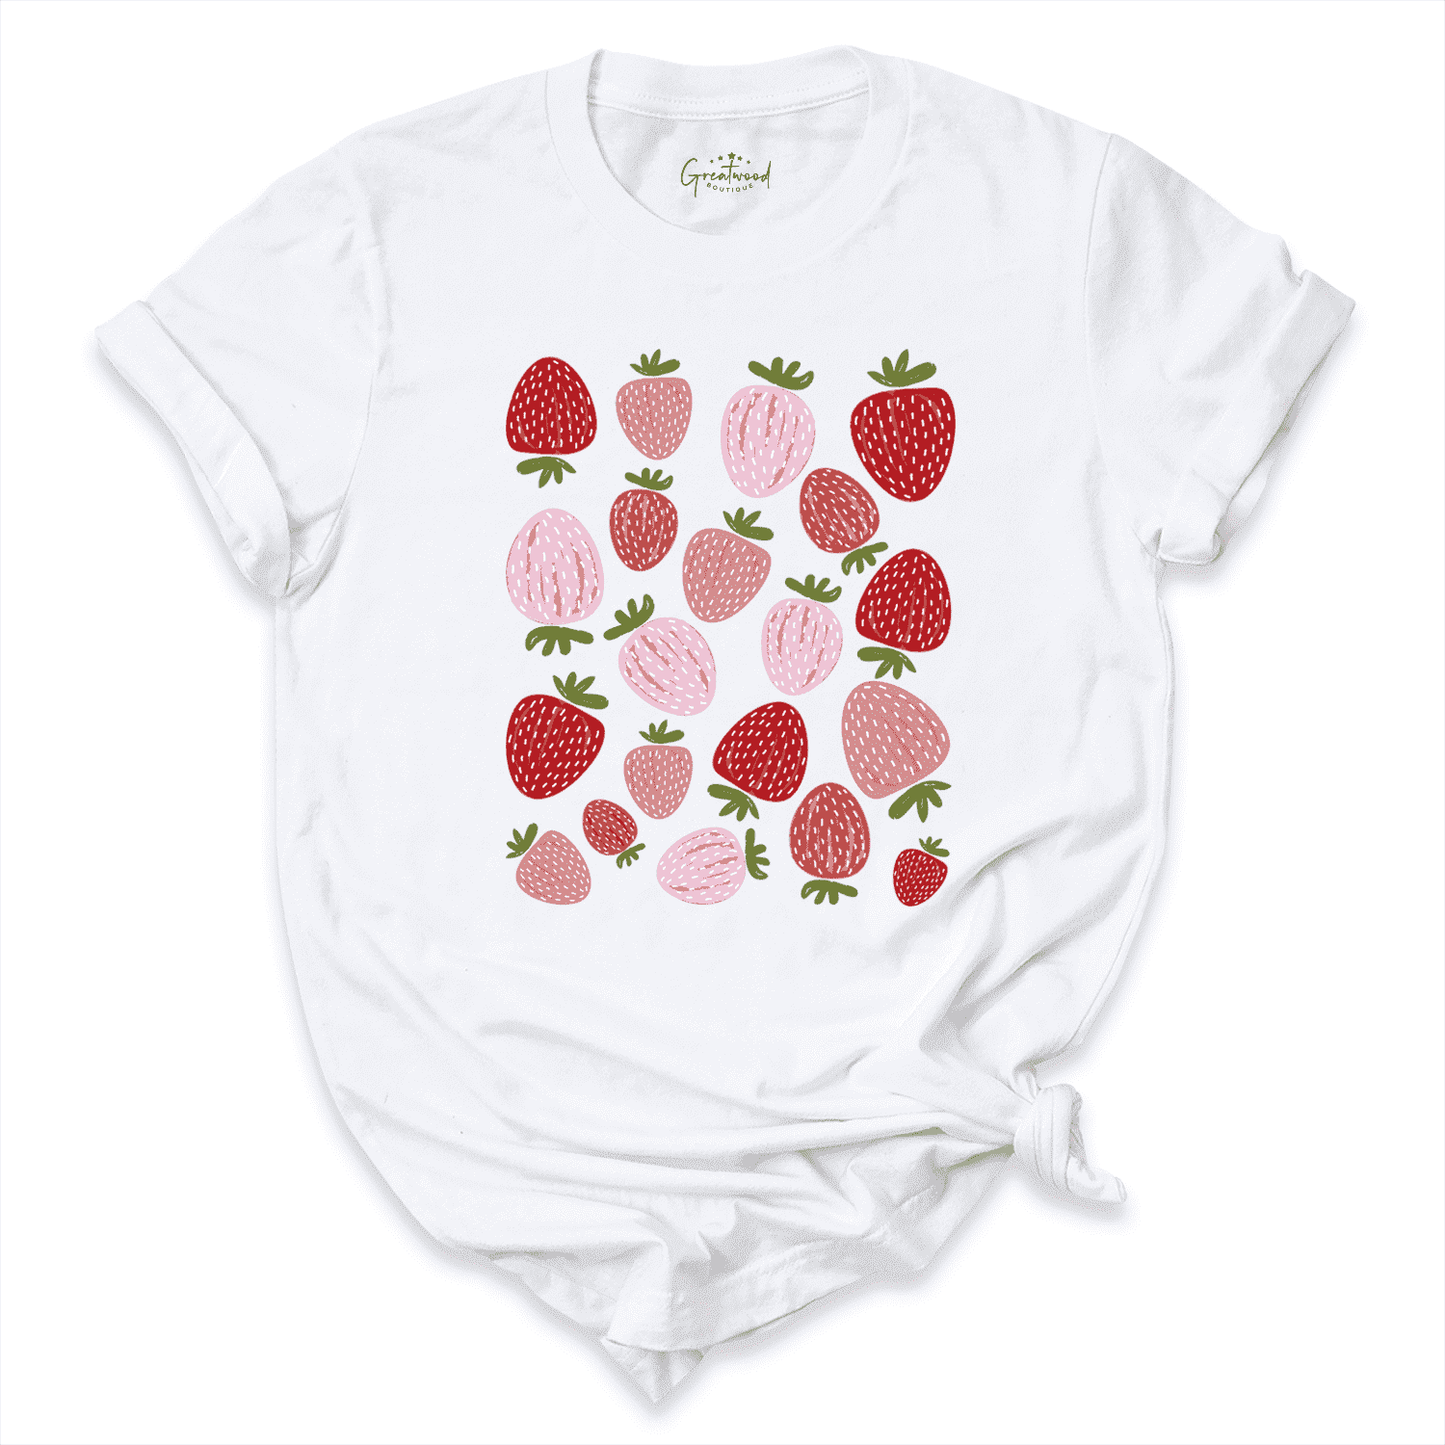 Strawberries Shirt White - Greatwood Boutique